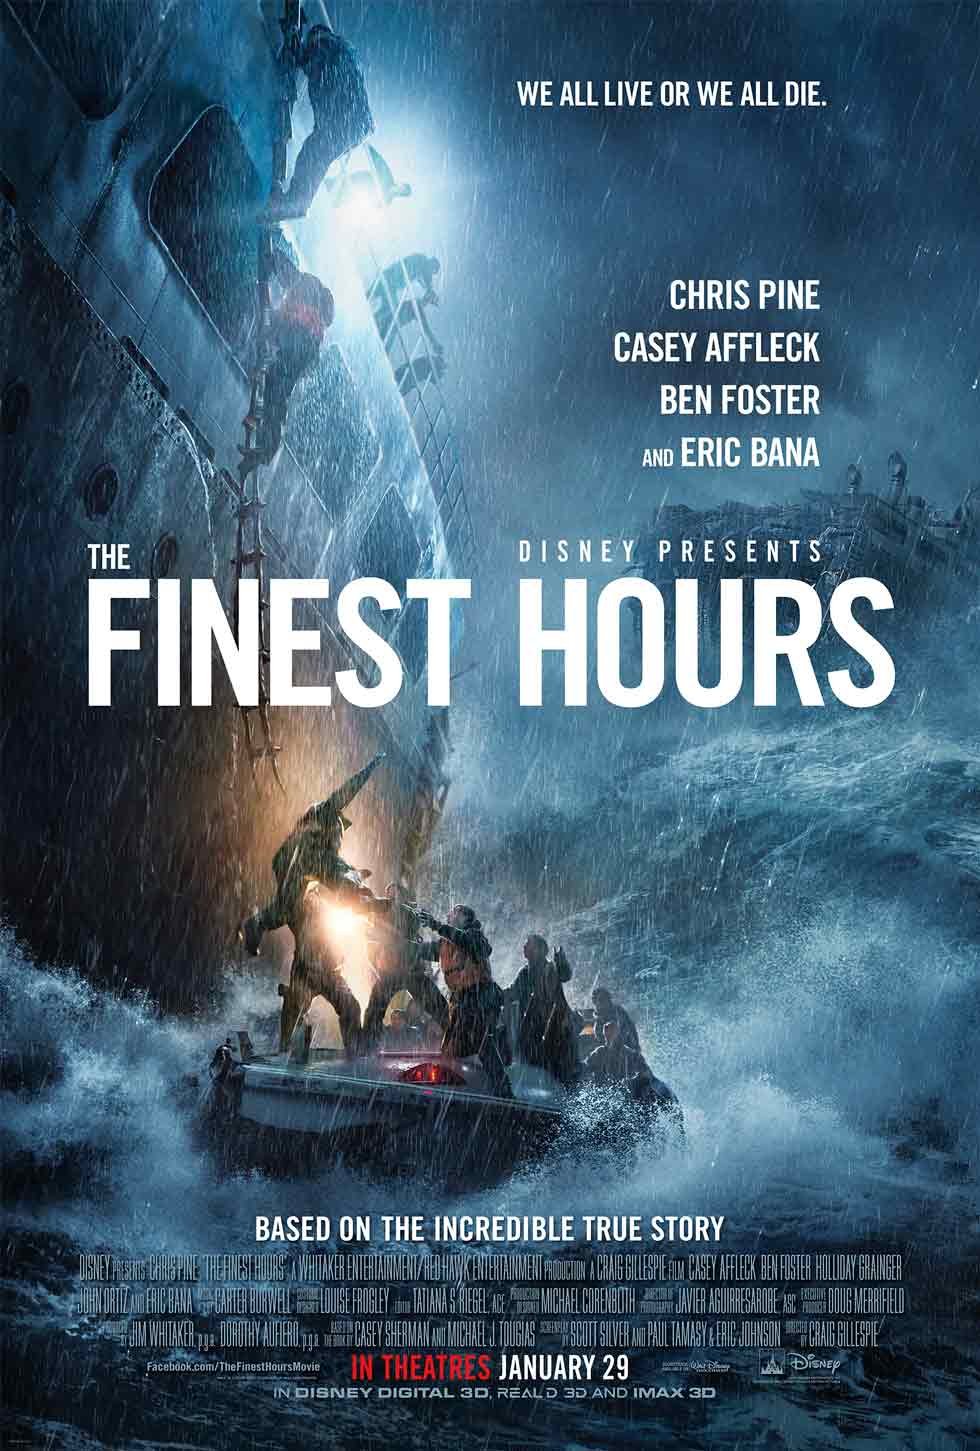 ... passes to see an advanced screening of the movie The Finest Hours